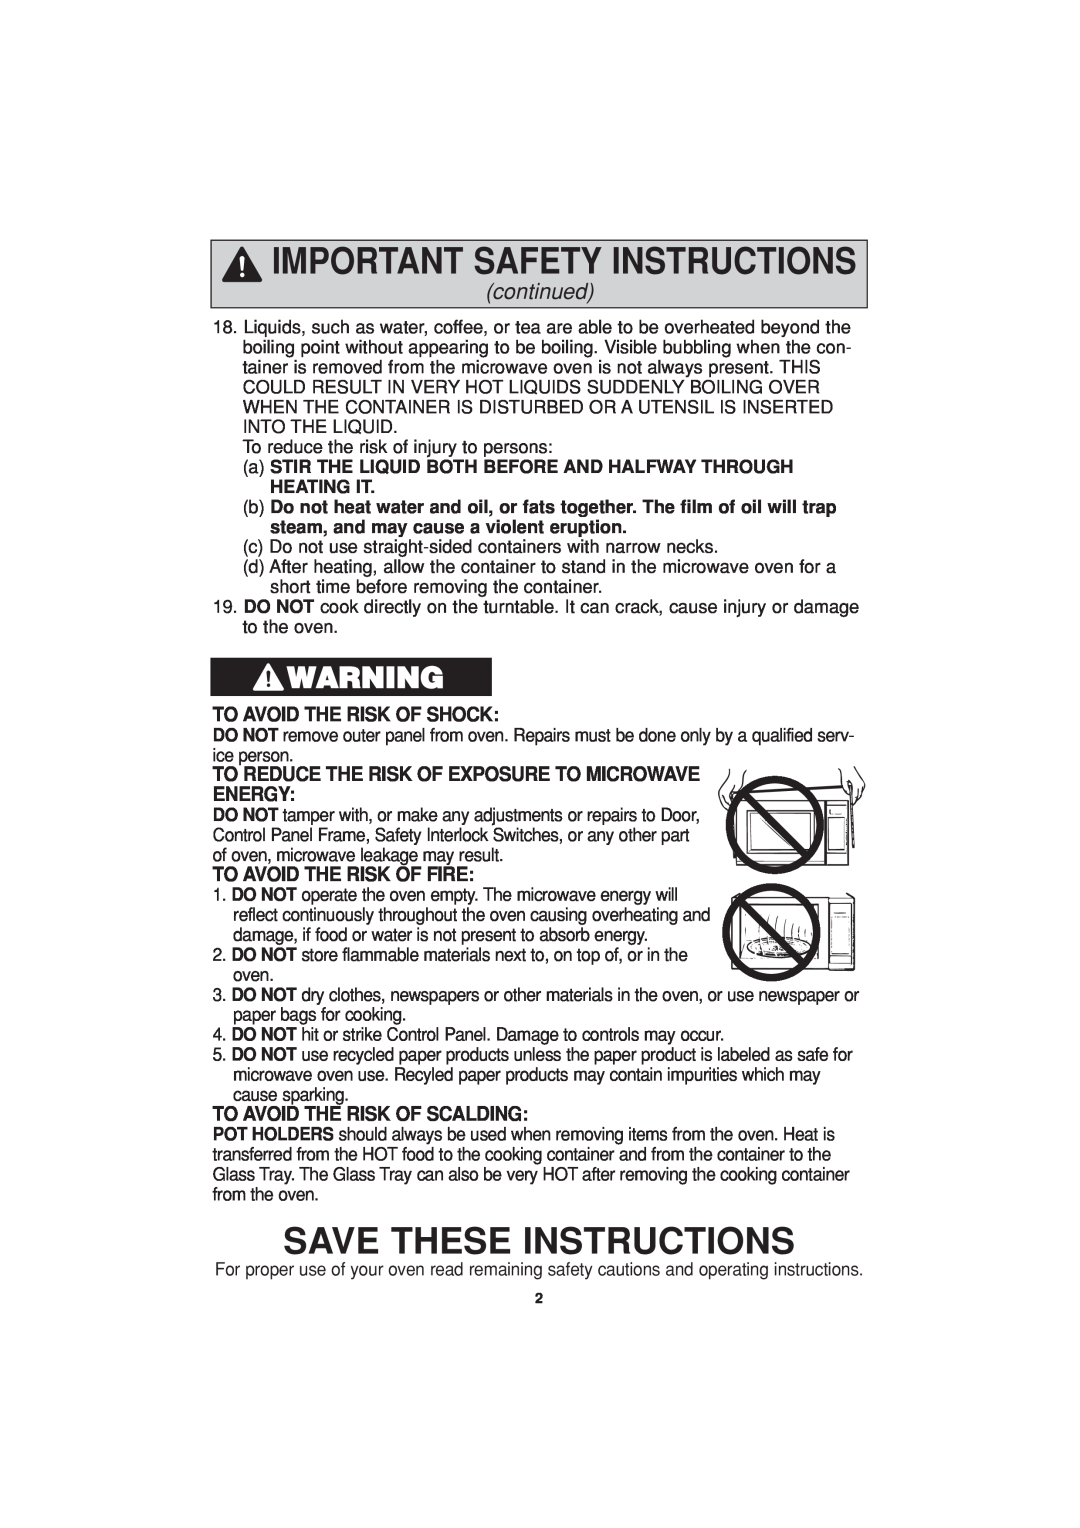 Panasonic NN-H624 Save These Instructions, continued, To Avoid The Risk Of Shock, Energy, To Avoid The Risk Of Fire 